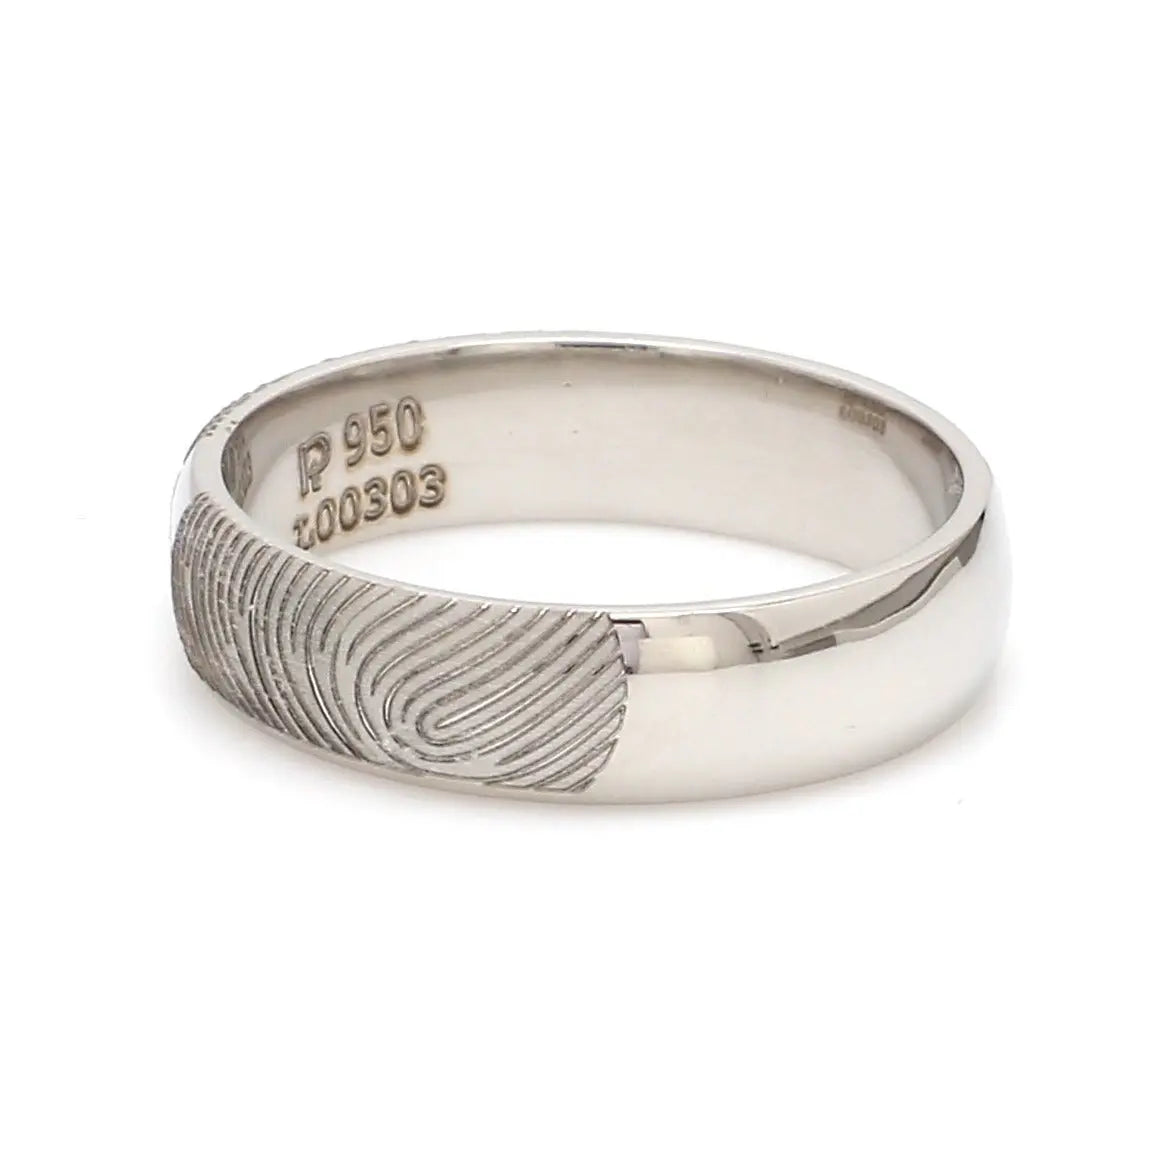 Customized Fingerprint Engraved Platinum Rings with Diamonds for Couples   Jewelove.US